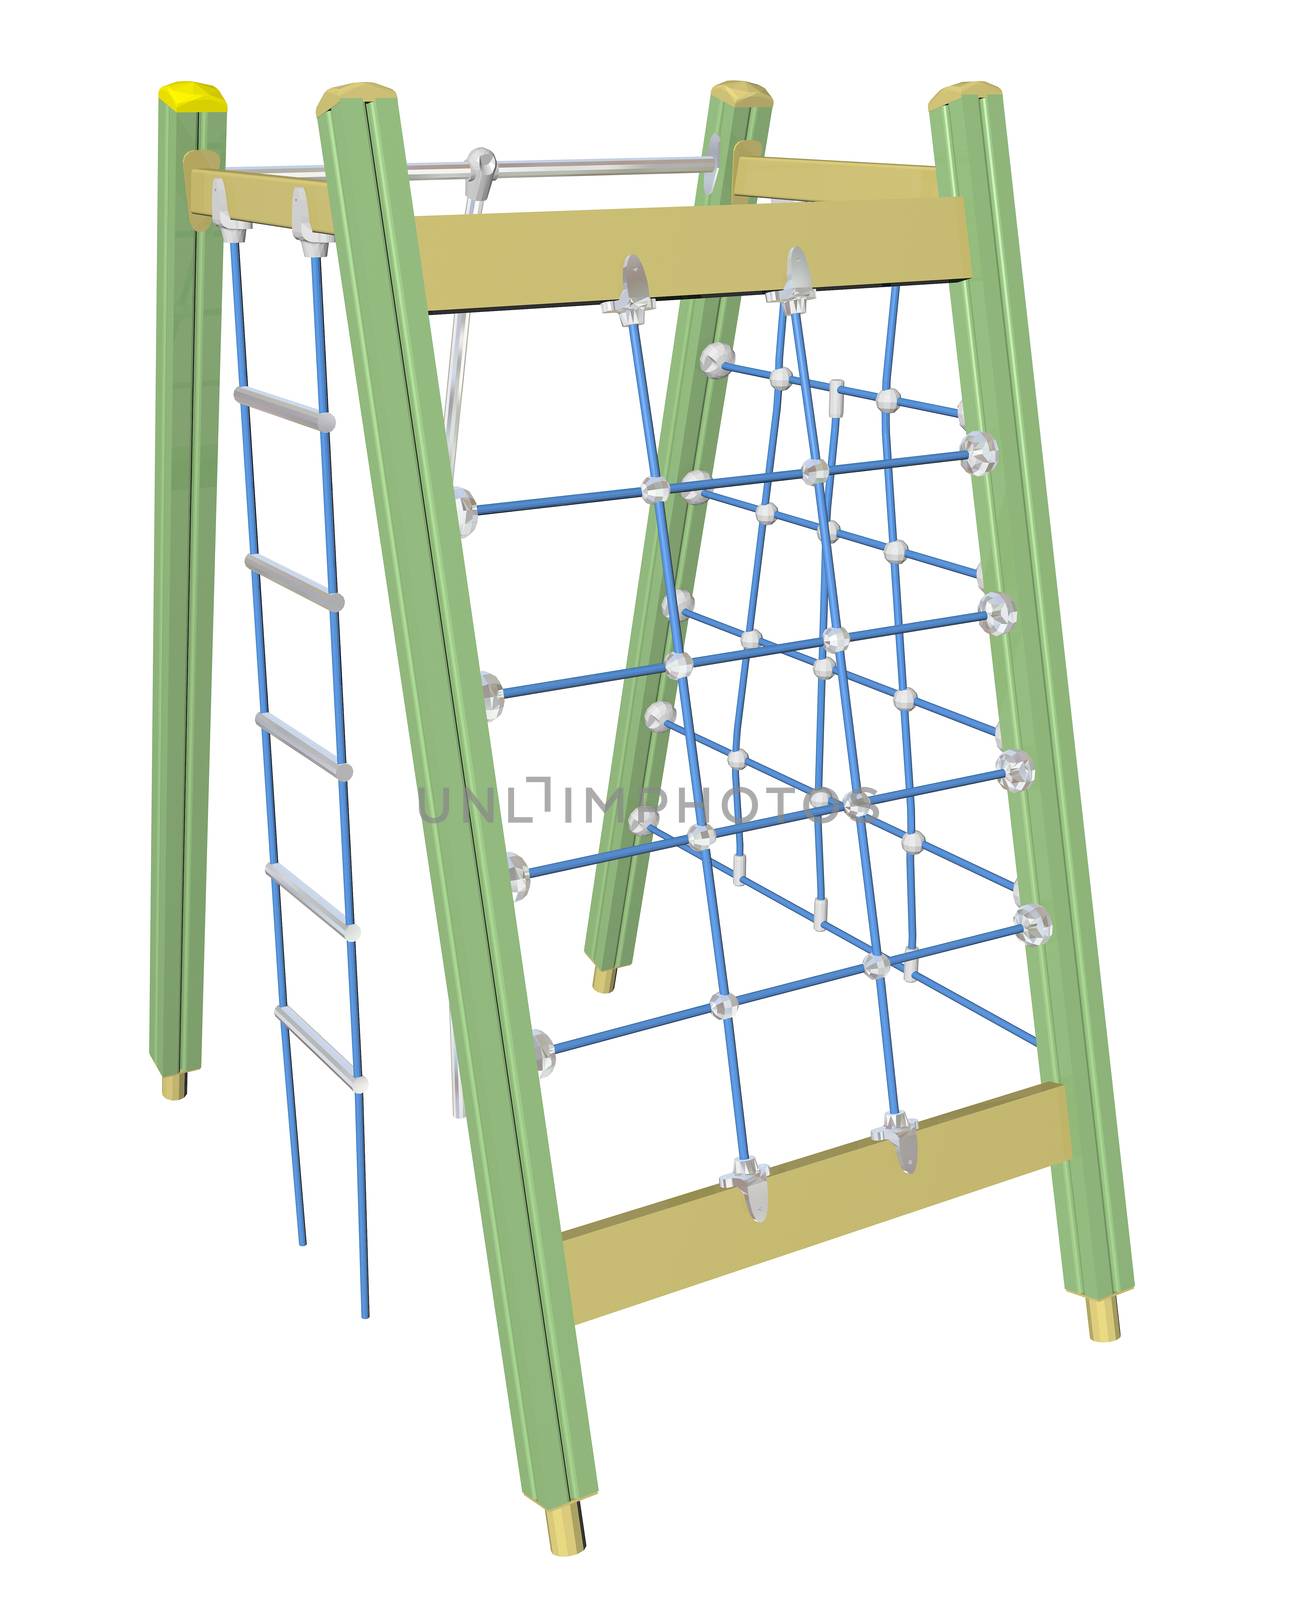 Play and climbing net, yellow green blue, 3D illustration, isolated against a white background.